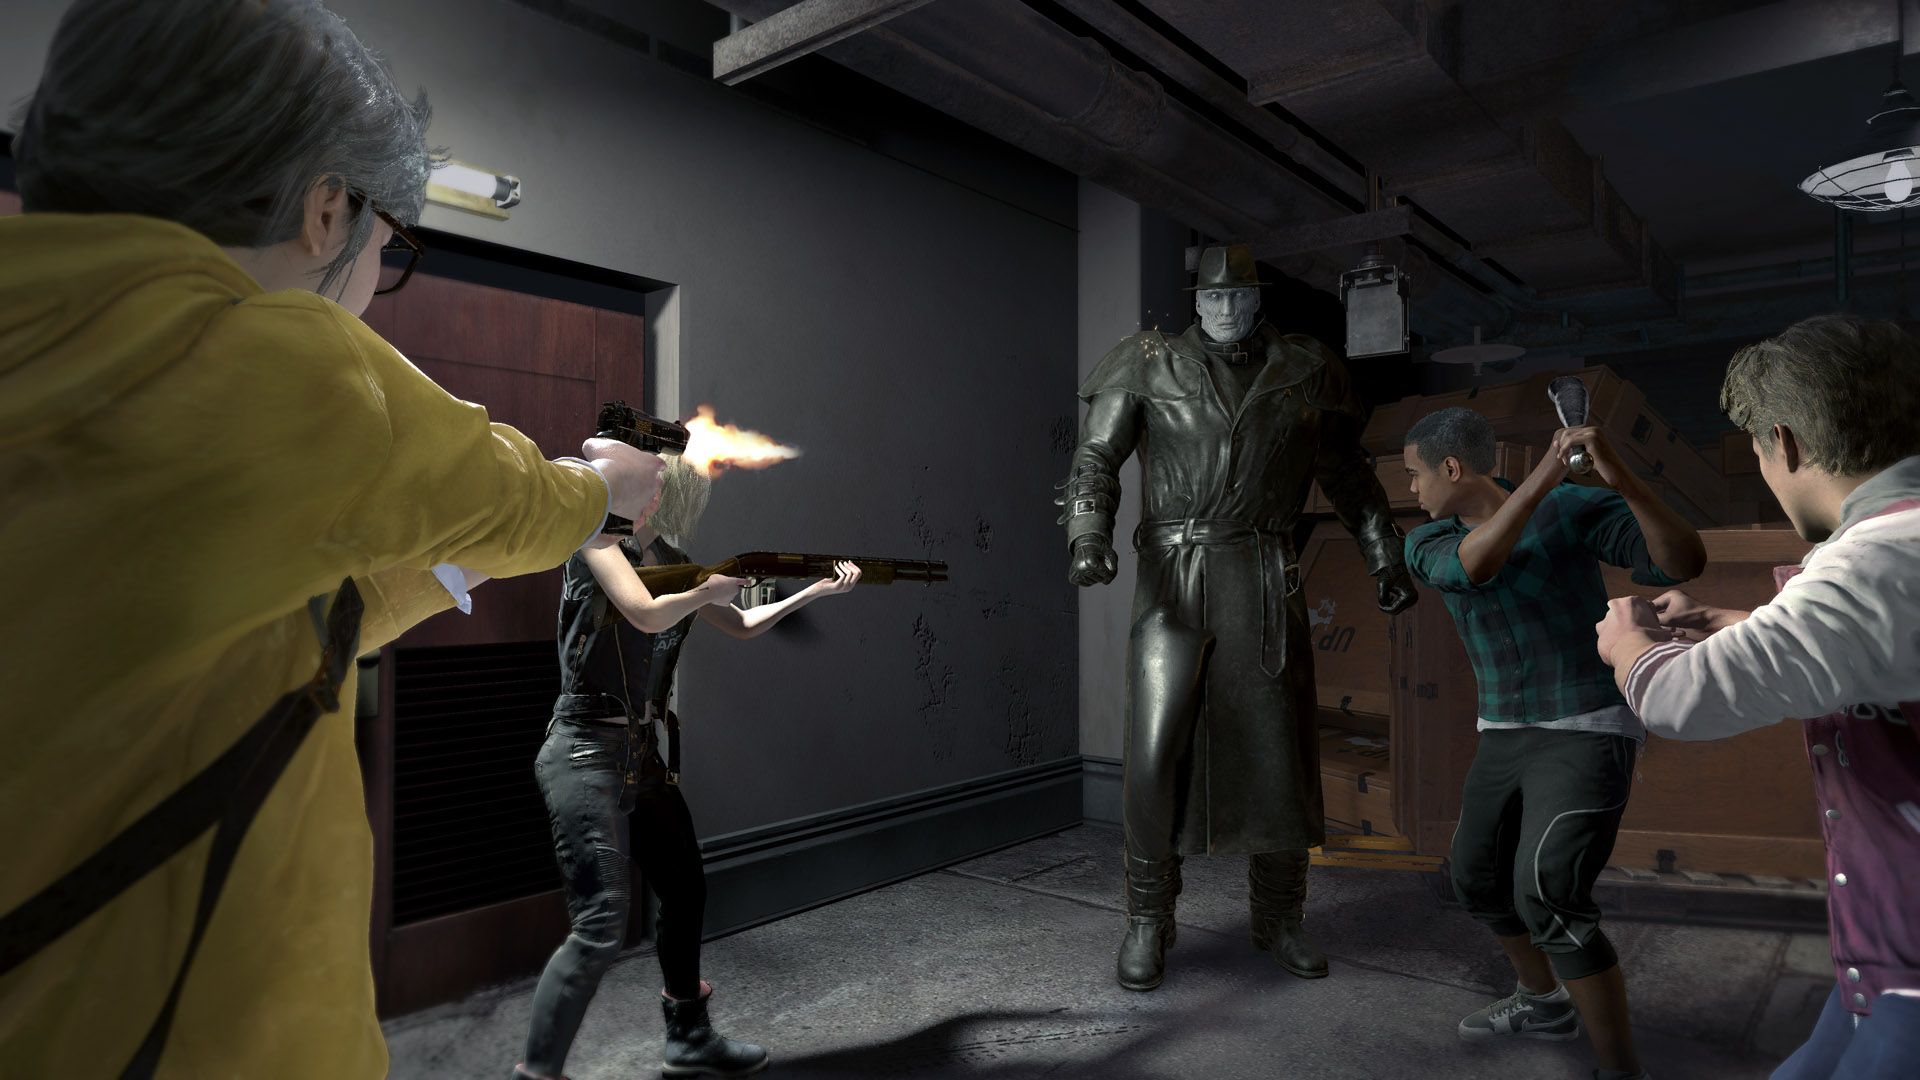 Project Resistance takes Resident Evil in a new direction closed beta starts soon image 1